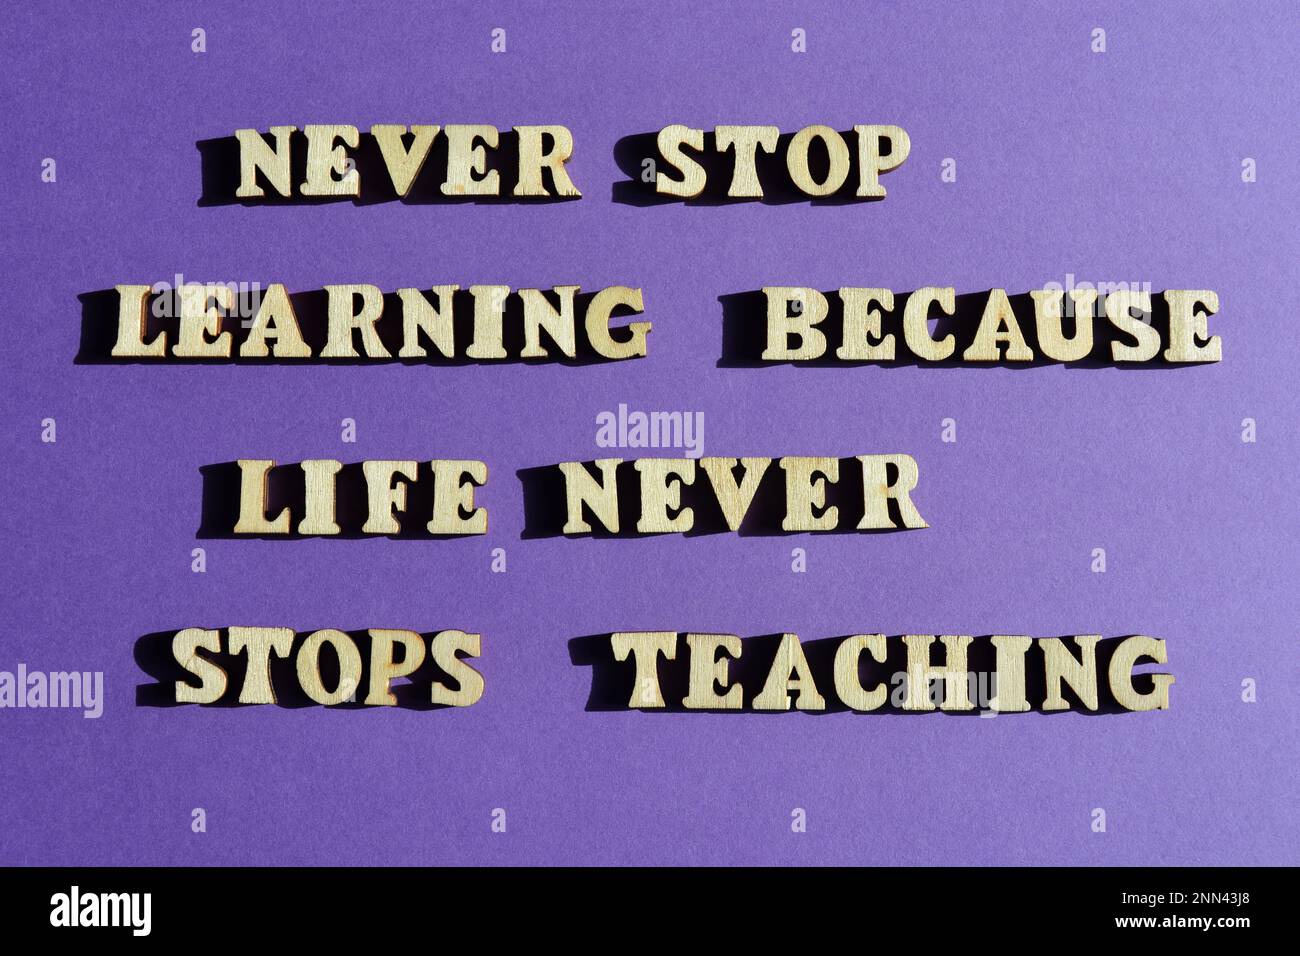 Never Stop Learning Because Life Never Stops Teaching, motivational phrase in wooden alphabet letters isolated on purple background Stock Photo